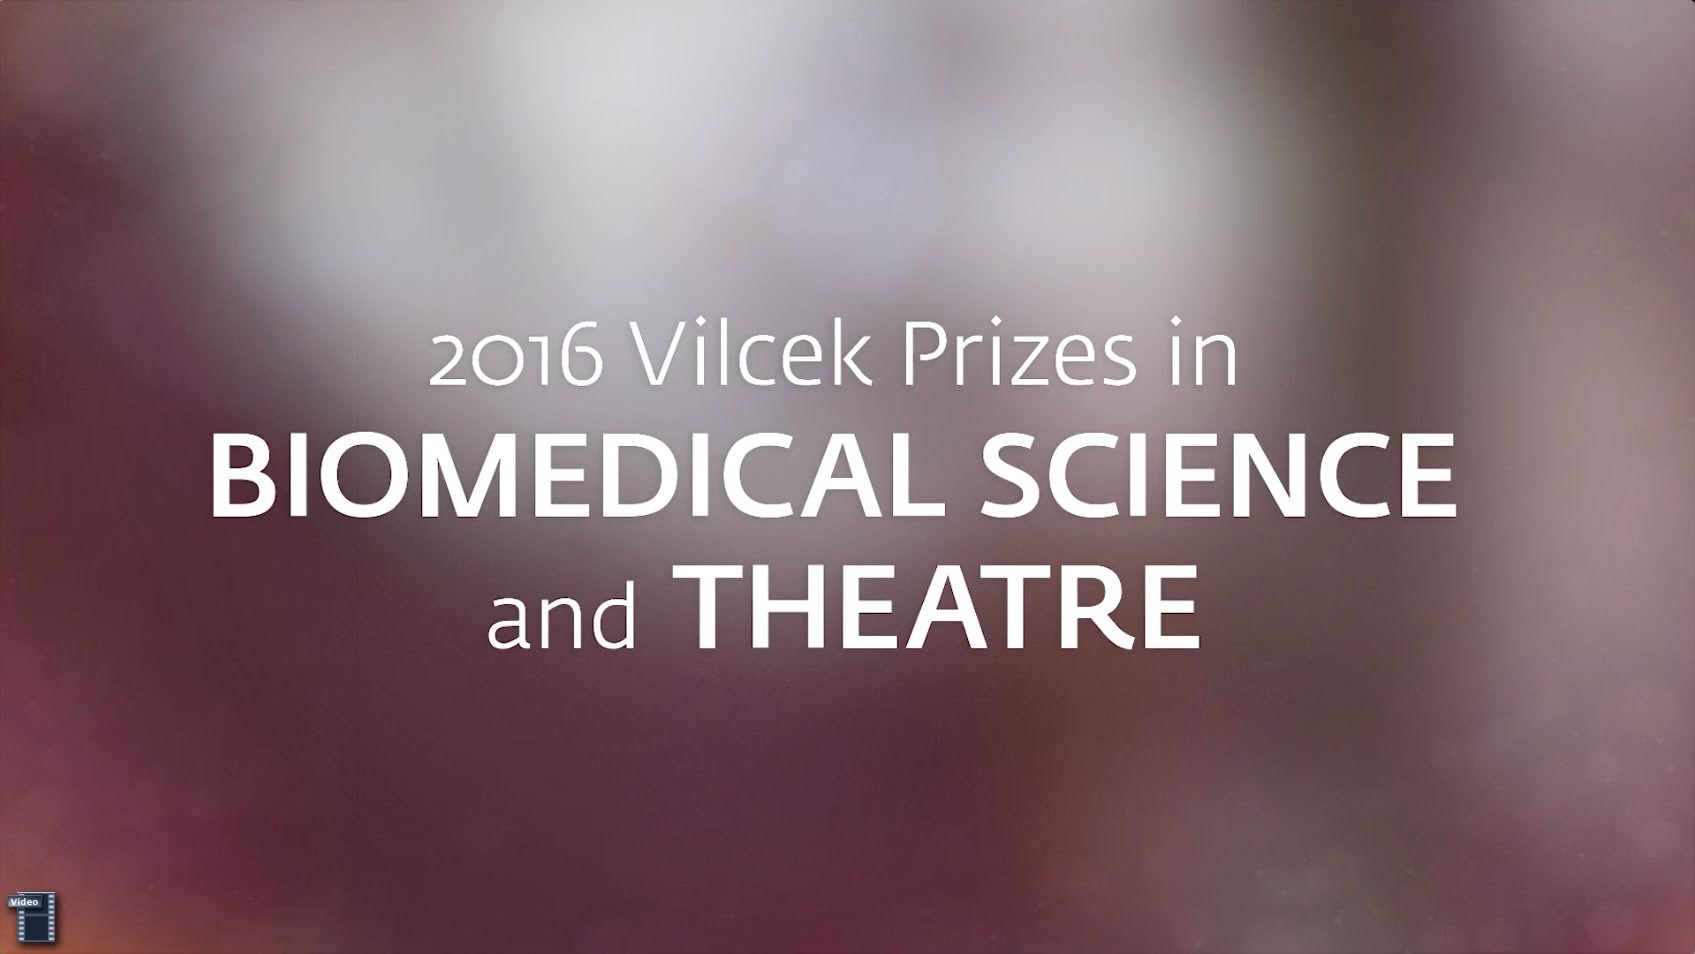 2016 Vilcek Prizes in Biomedical Science and Theatre